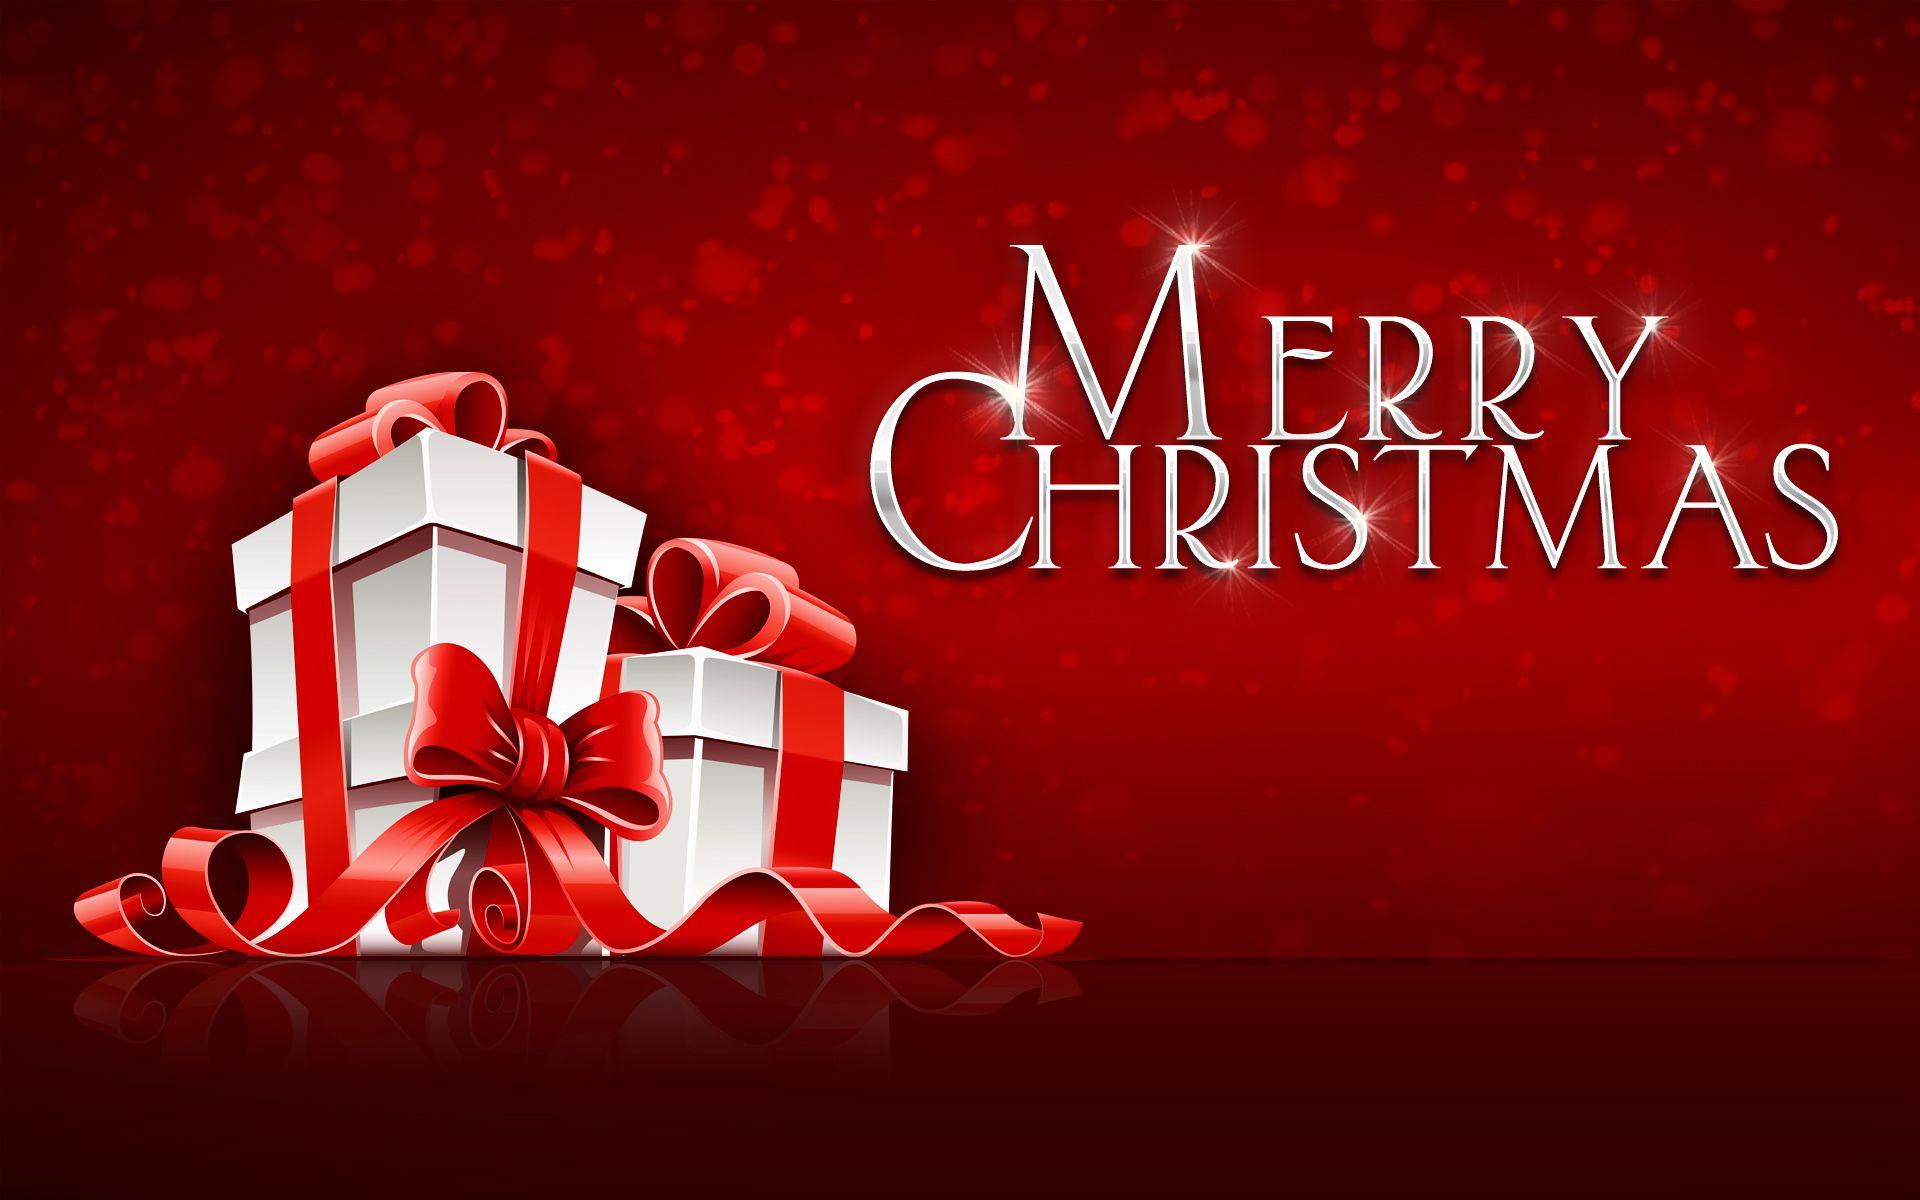 Merry Christmas - , wishes, quotes, picture, greetings